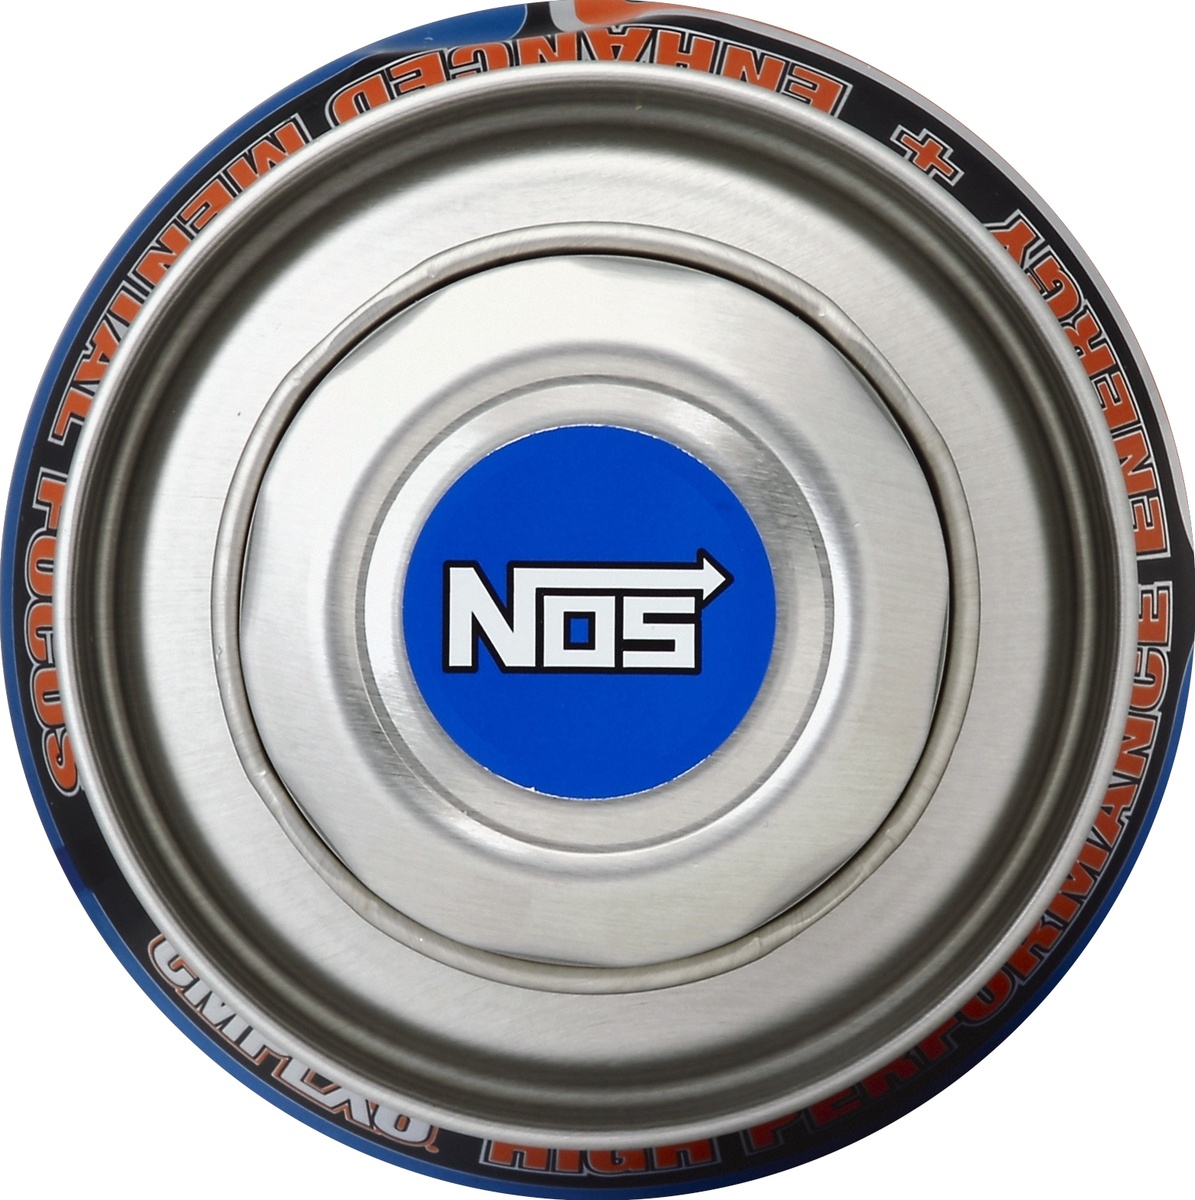 slide 4 of 4, NOS 24oz can of kick-ass. Our #1 seller, NOS Original, provides great-tasting fuel to #GetAfterIt. Available in 16oz. can, 8-pack, or 24-pack. Fuel Up. Fire Up. 100 mile an hour power. Thundering from top gear to no fear, the super-charged take charge. It's time to strap in, or sit it out. How Hard Will You Drive? High Performance Energy., 24 oz